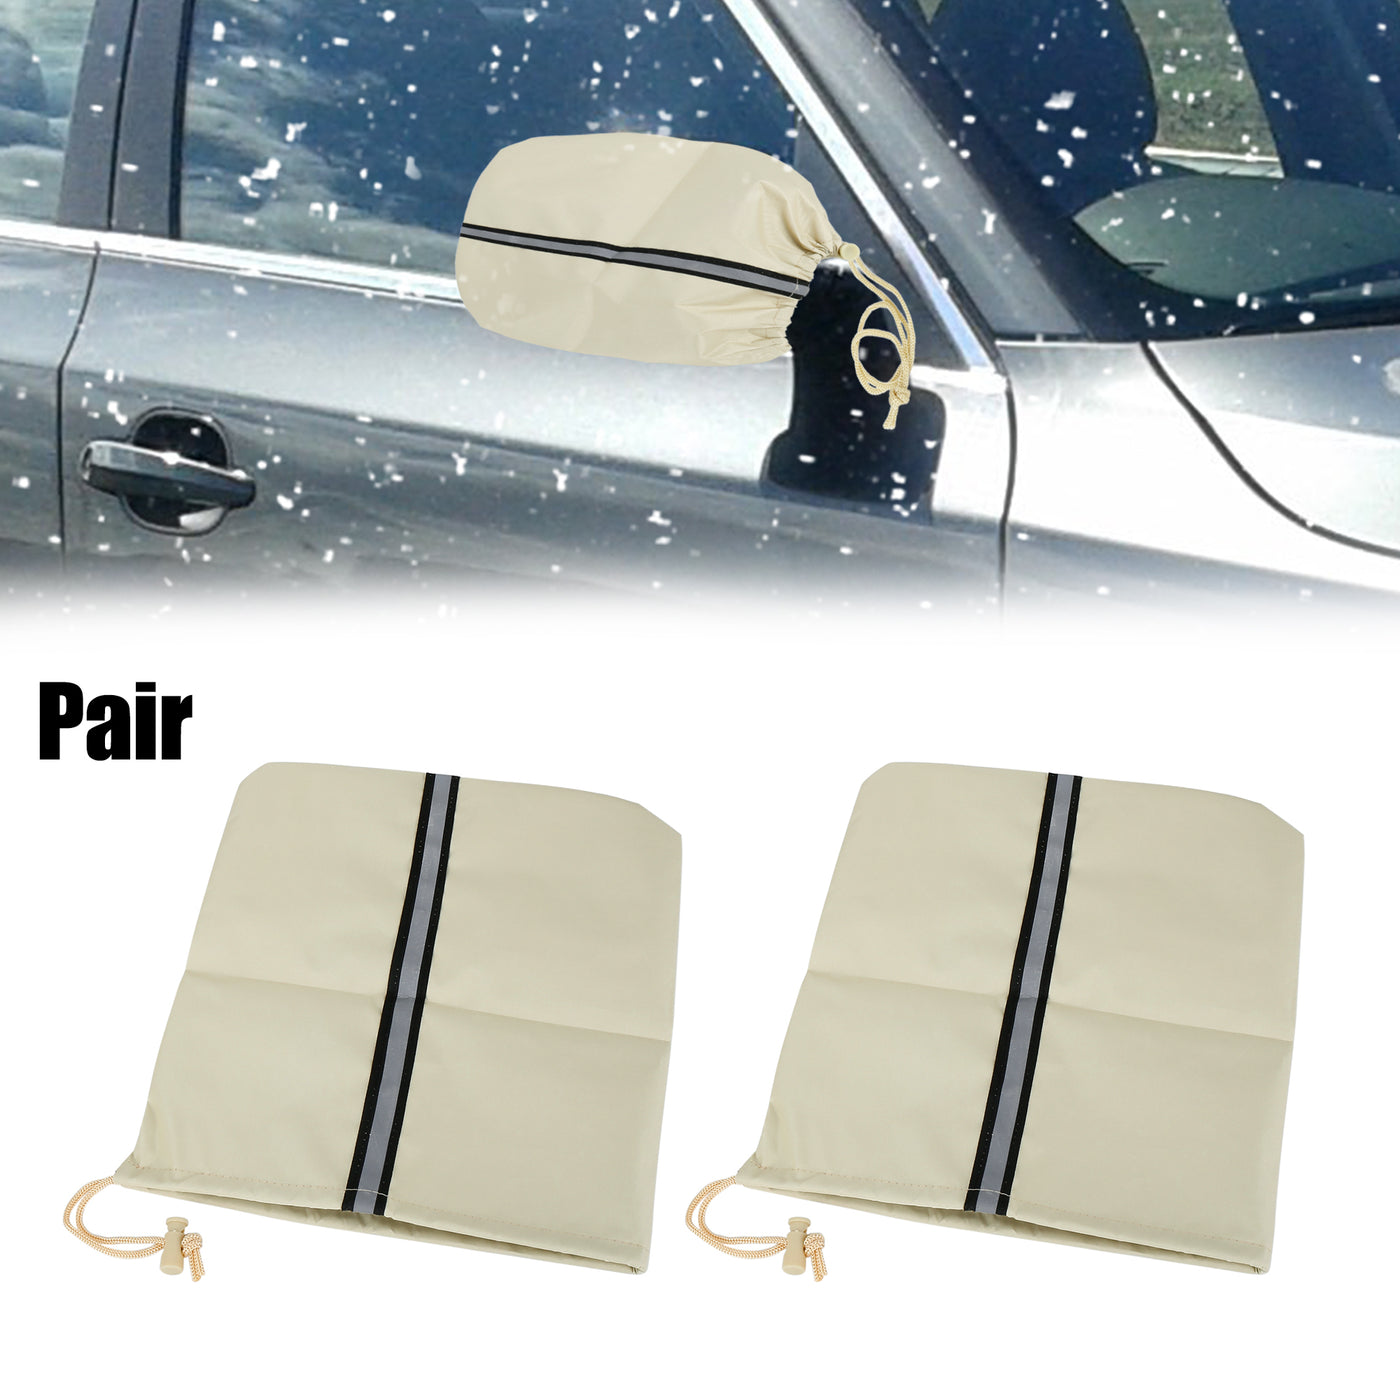 X AUTOHAUX Pair Beige Small Rear Side View Mirror Cover Bag with Reflective Strip for Car Vehicle